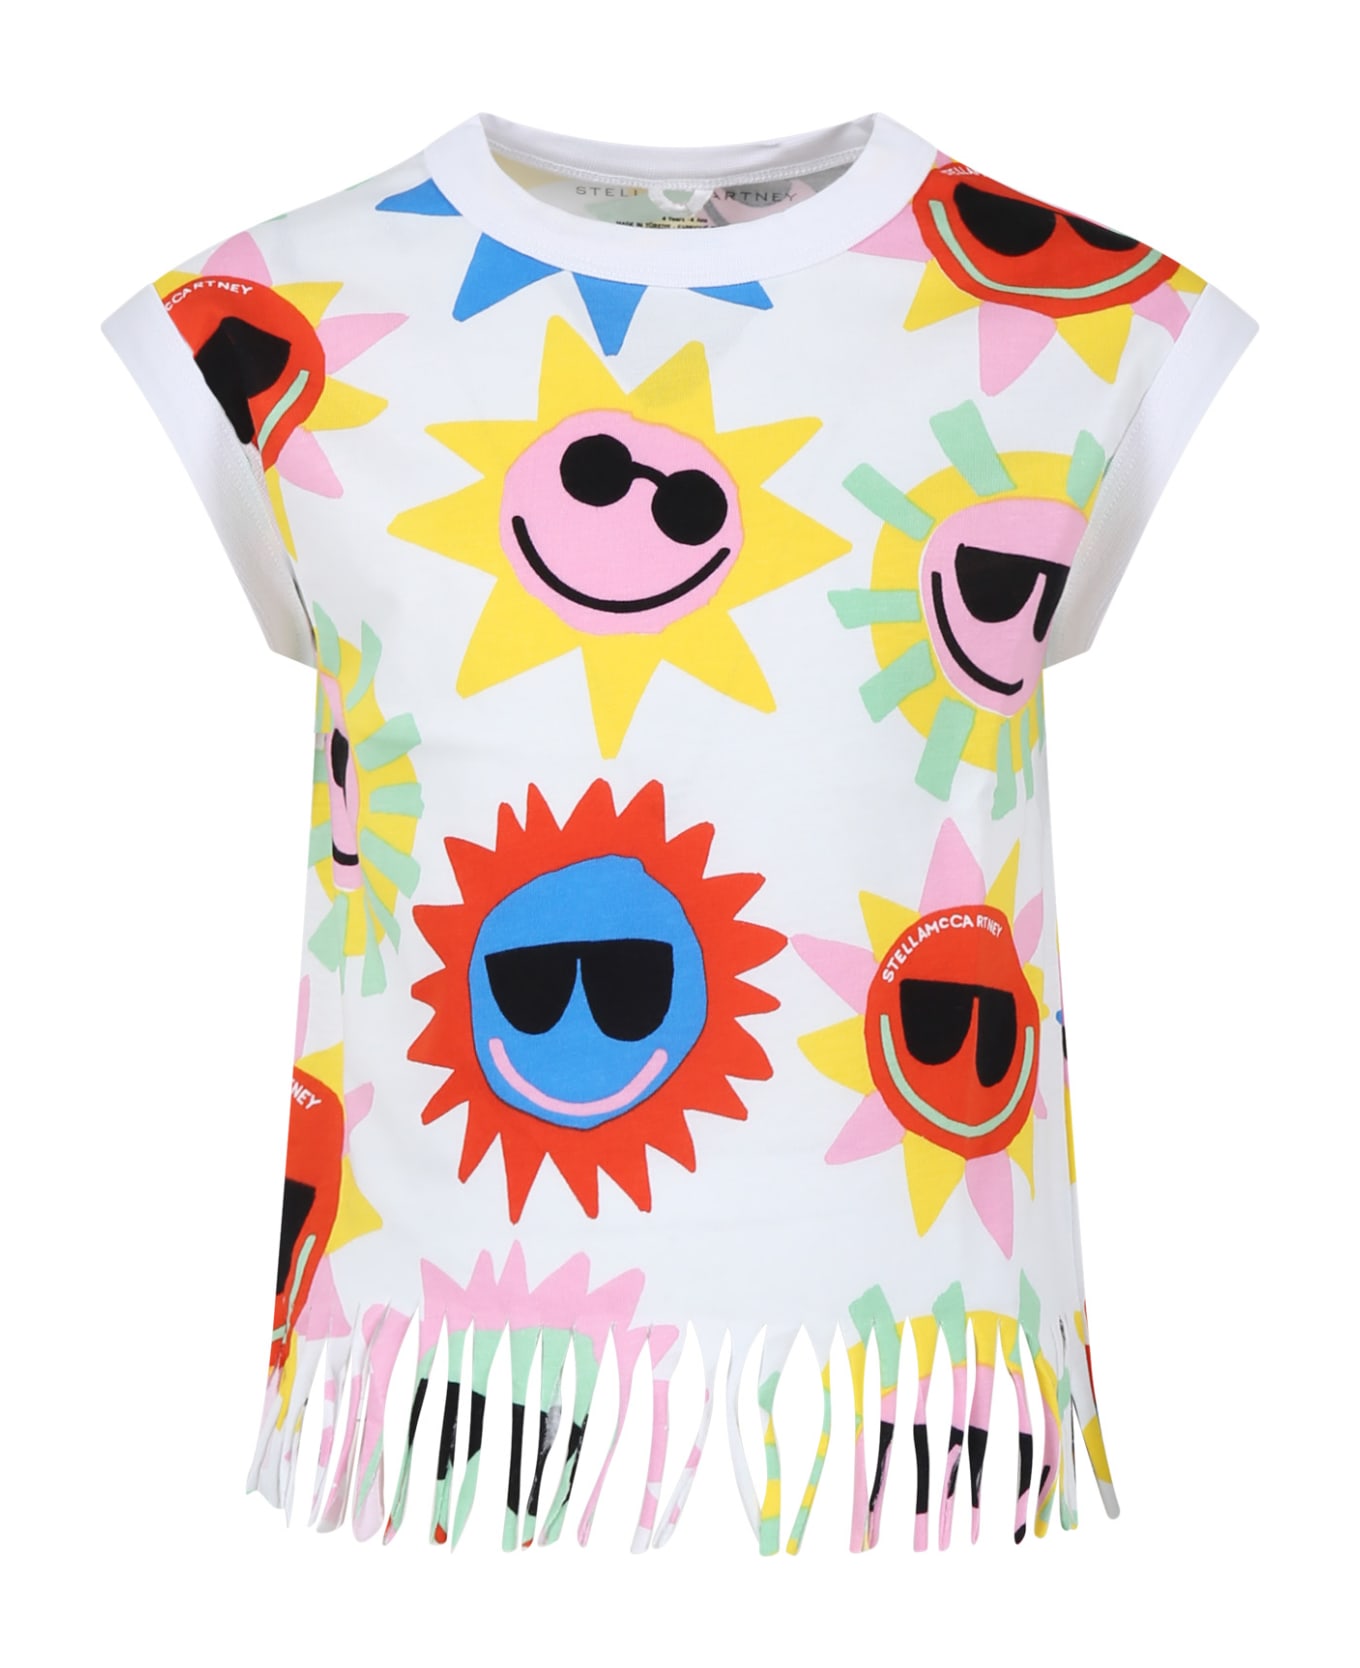 Stella McCartney Kids White Tank Top For Girl With All-over Multicolor Pattern - White